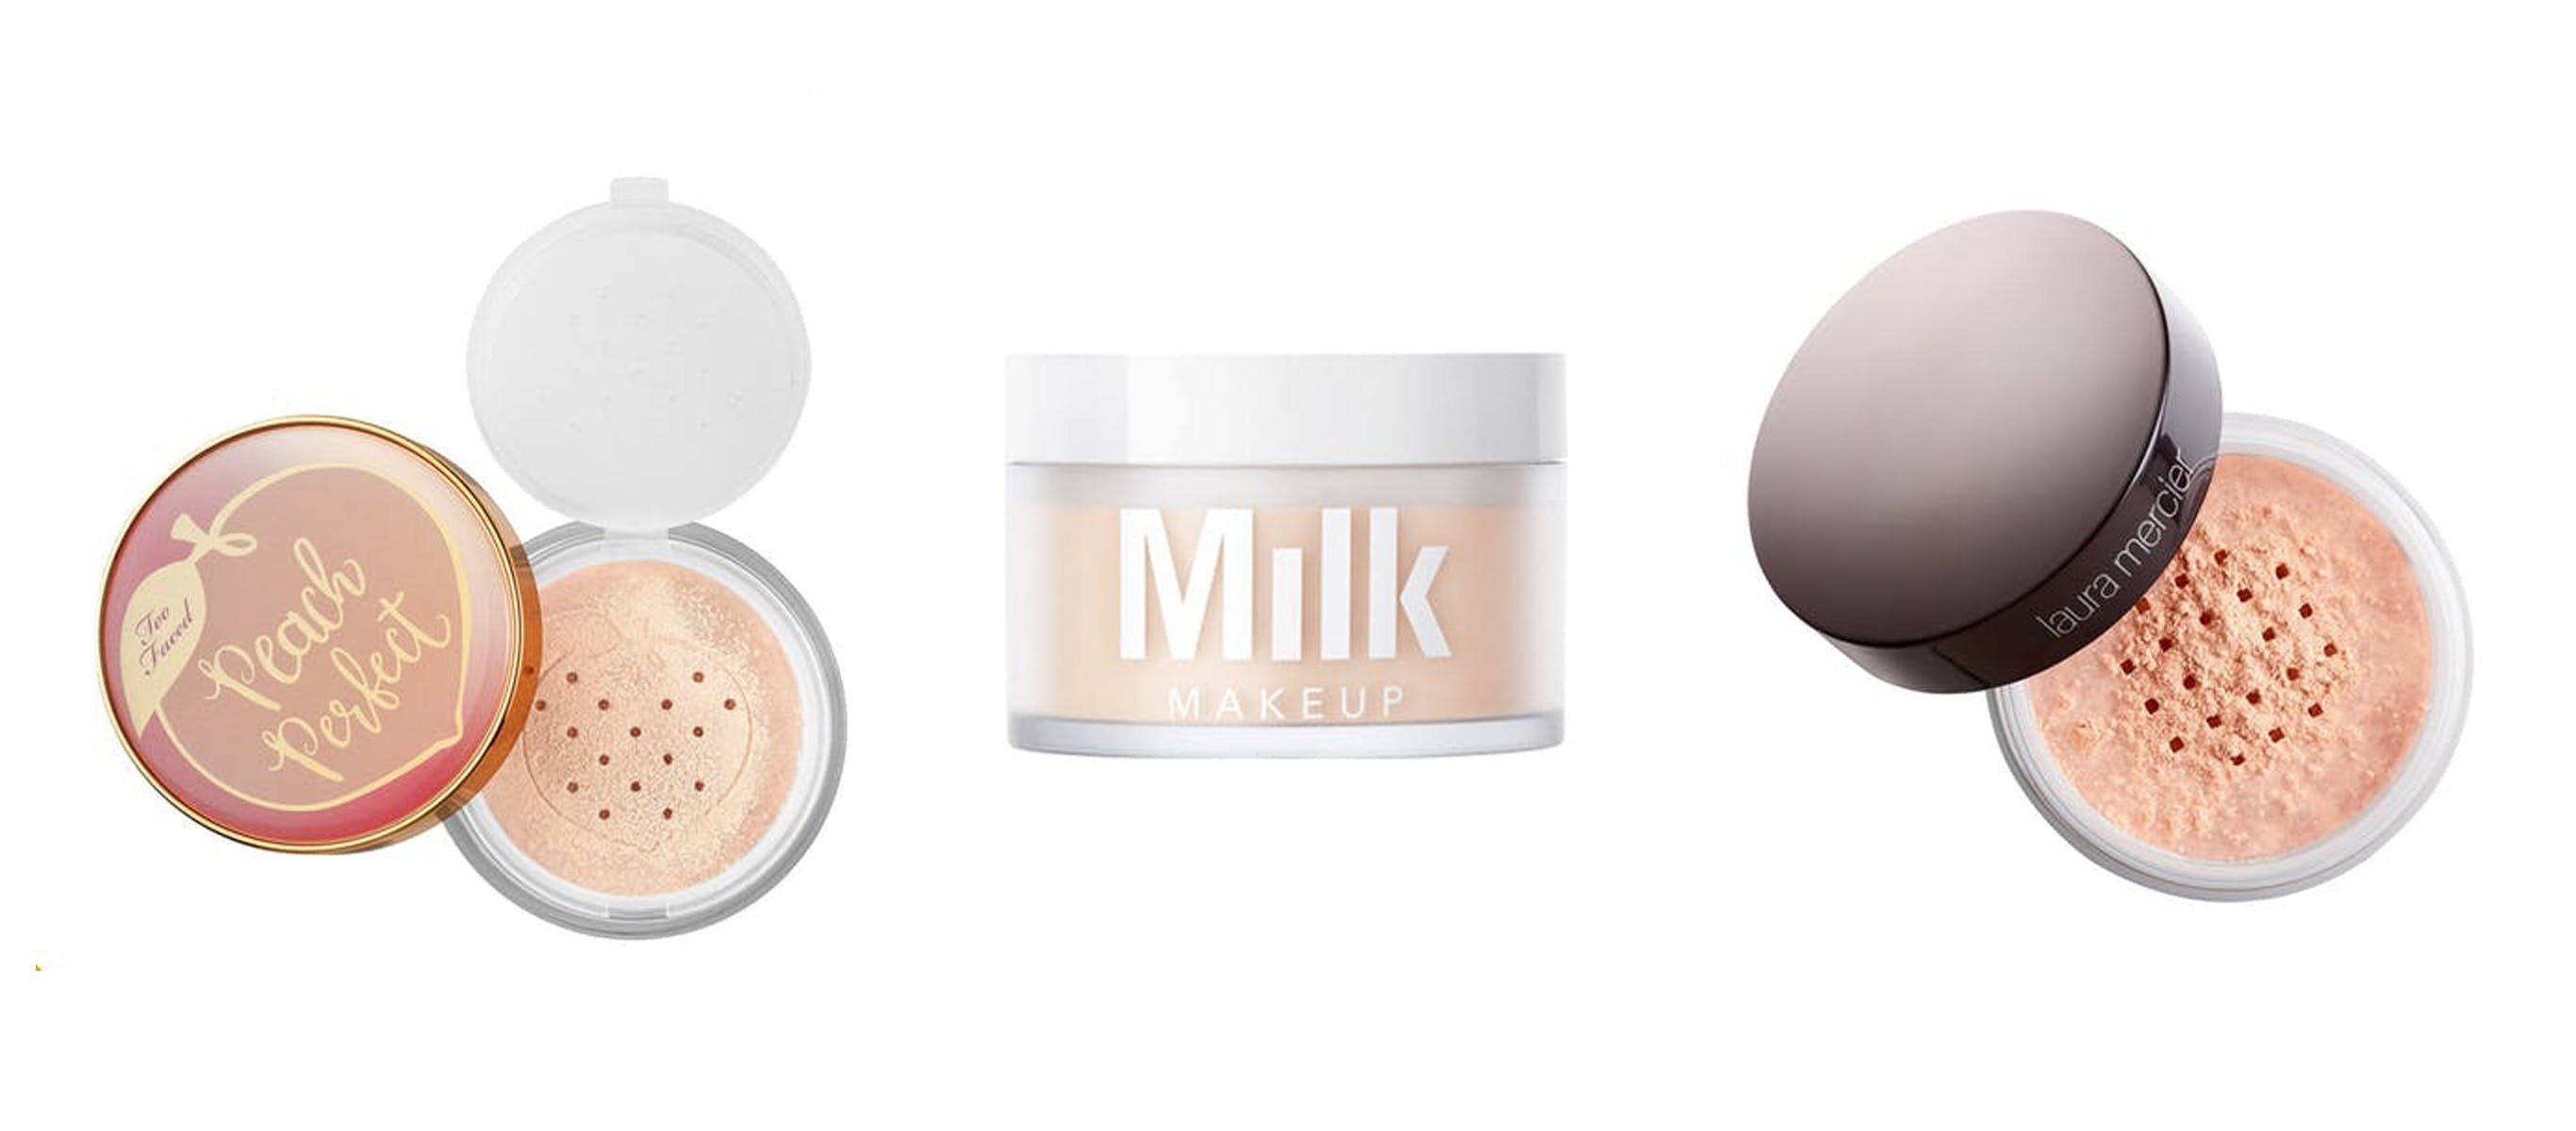 best loose powder for dry skin